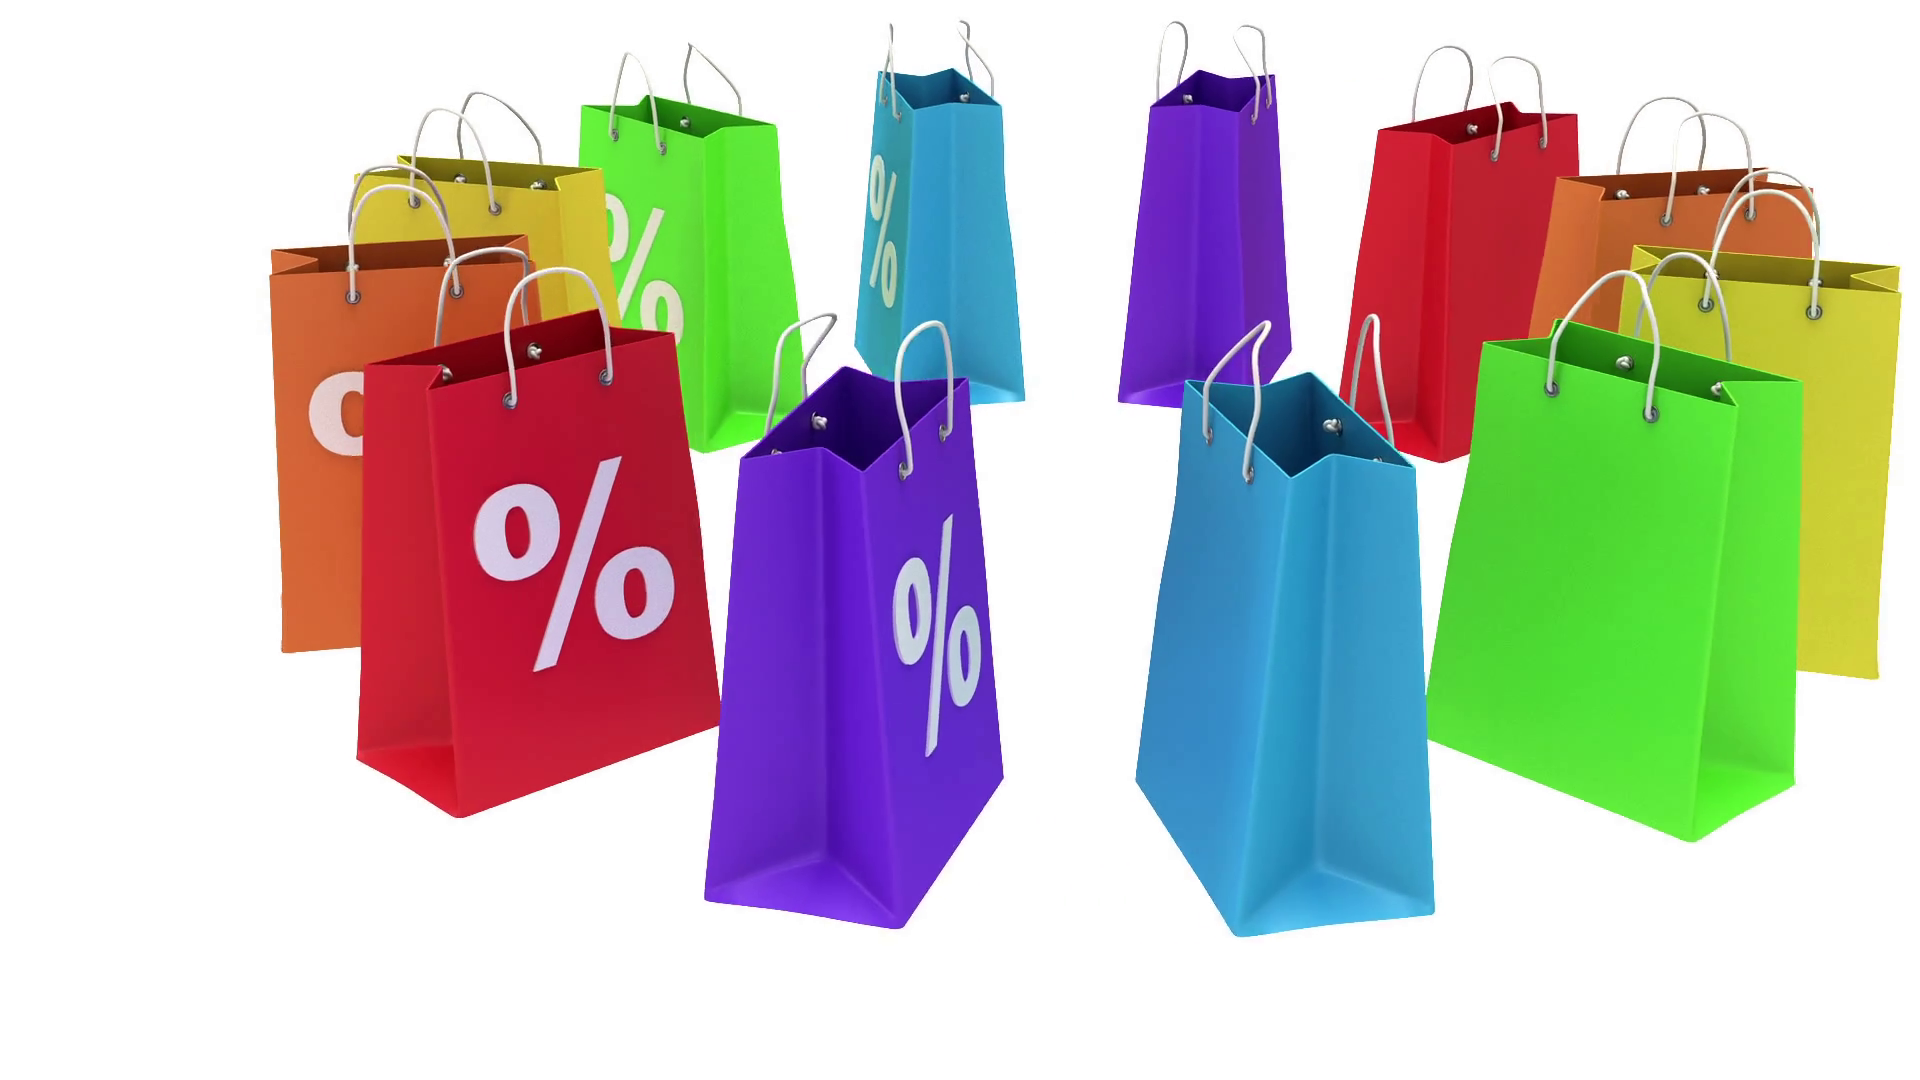 Colorful shopping paper bags animation. Bags with percent signs ...